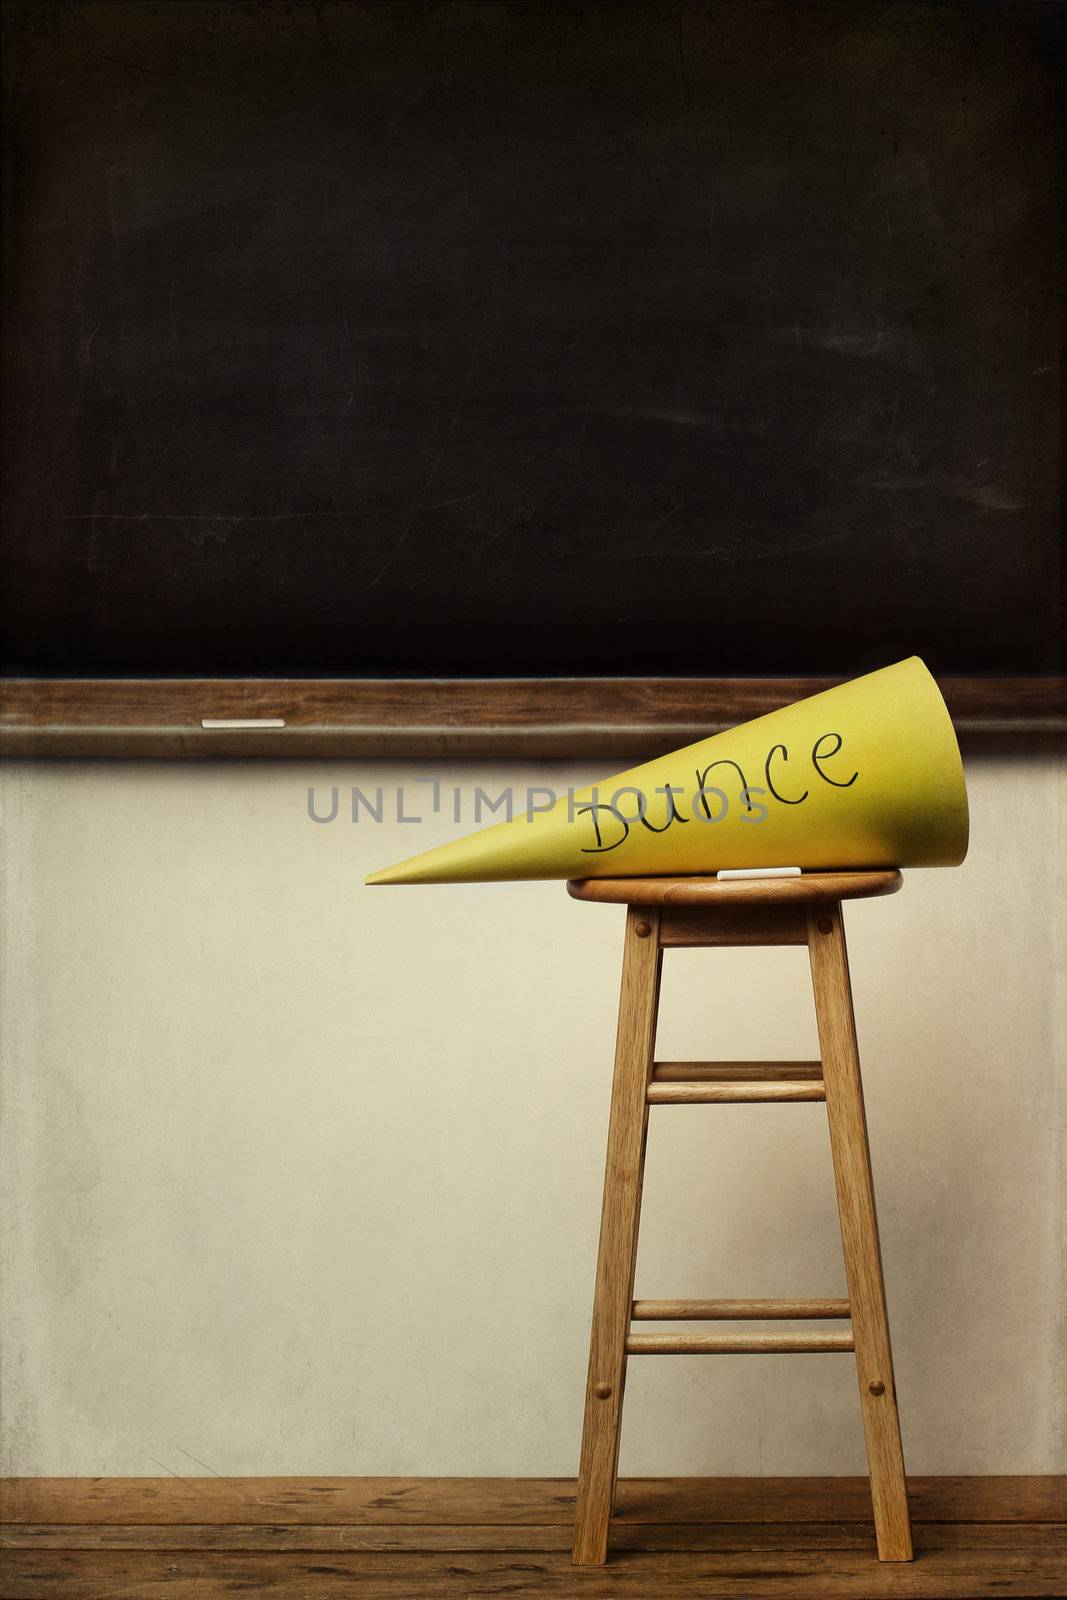 Yellow dunce hat on stool with chalkboard in background